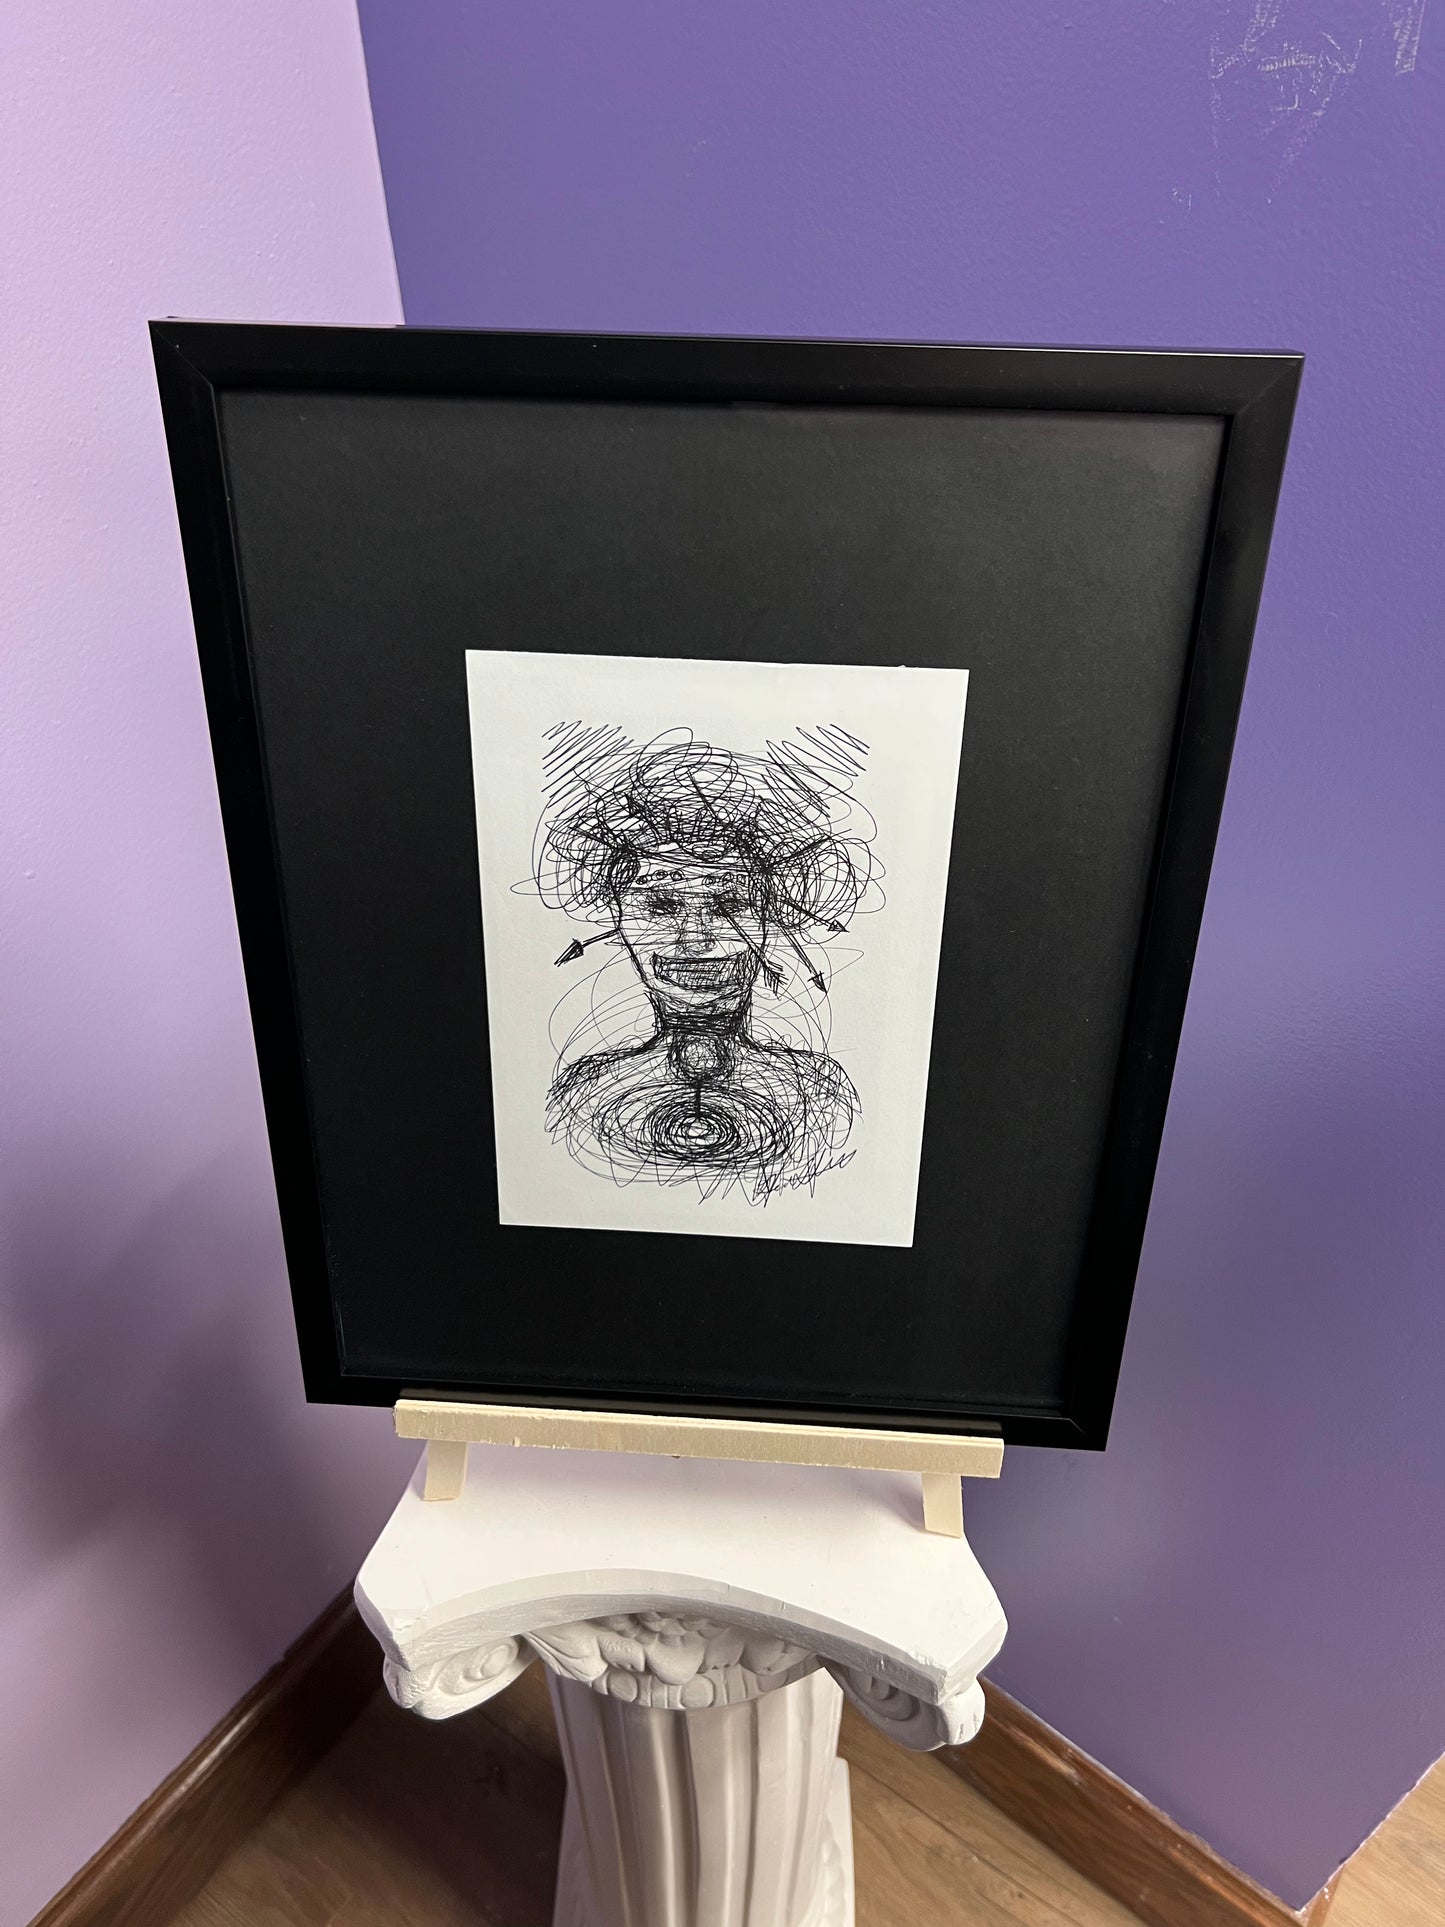 "Turns Out My Mental Health Is Not So Great" Framed Original